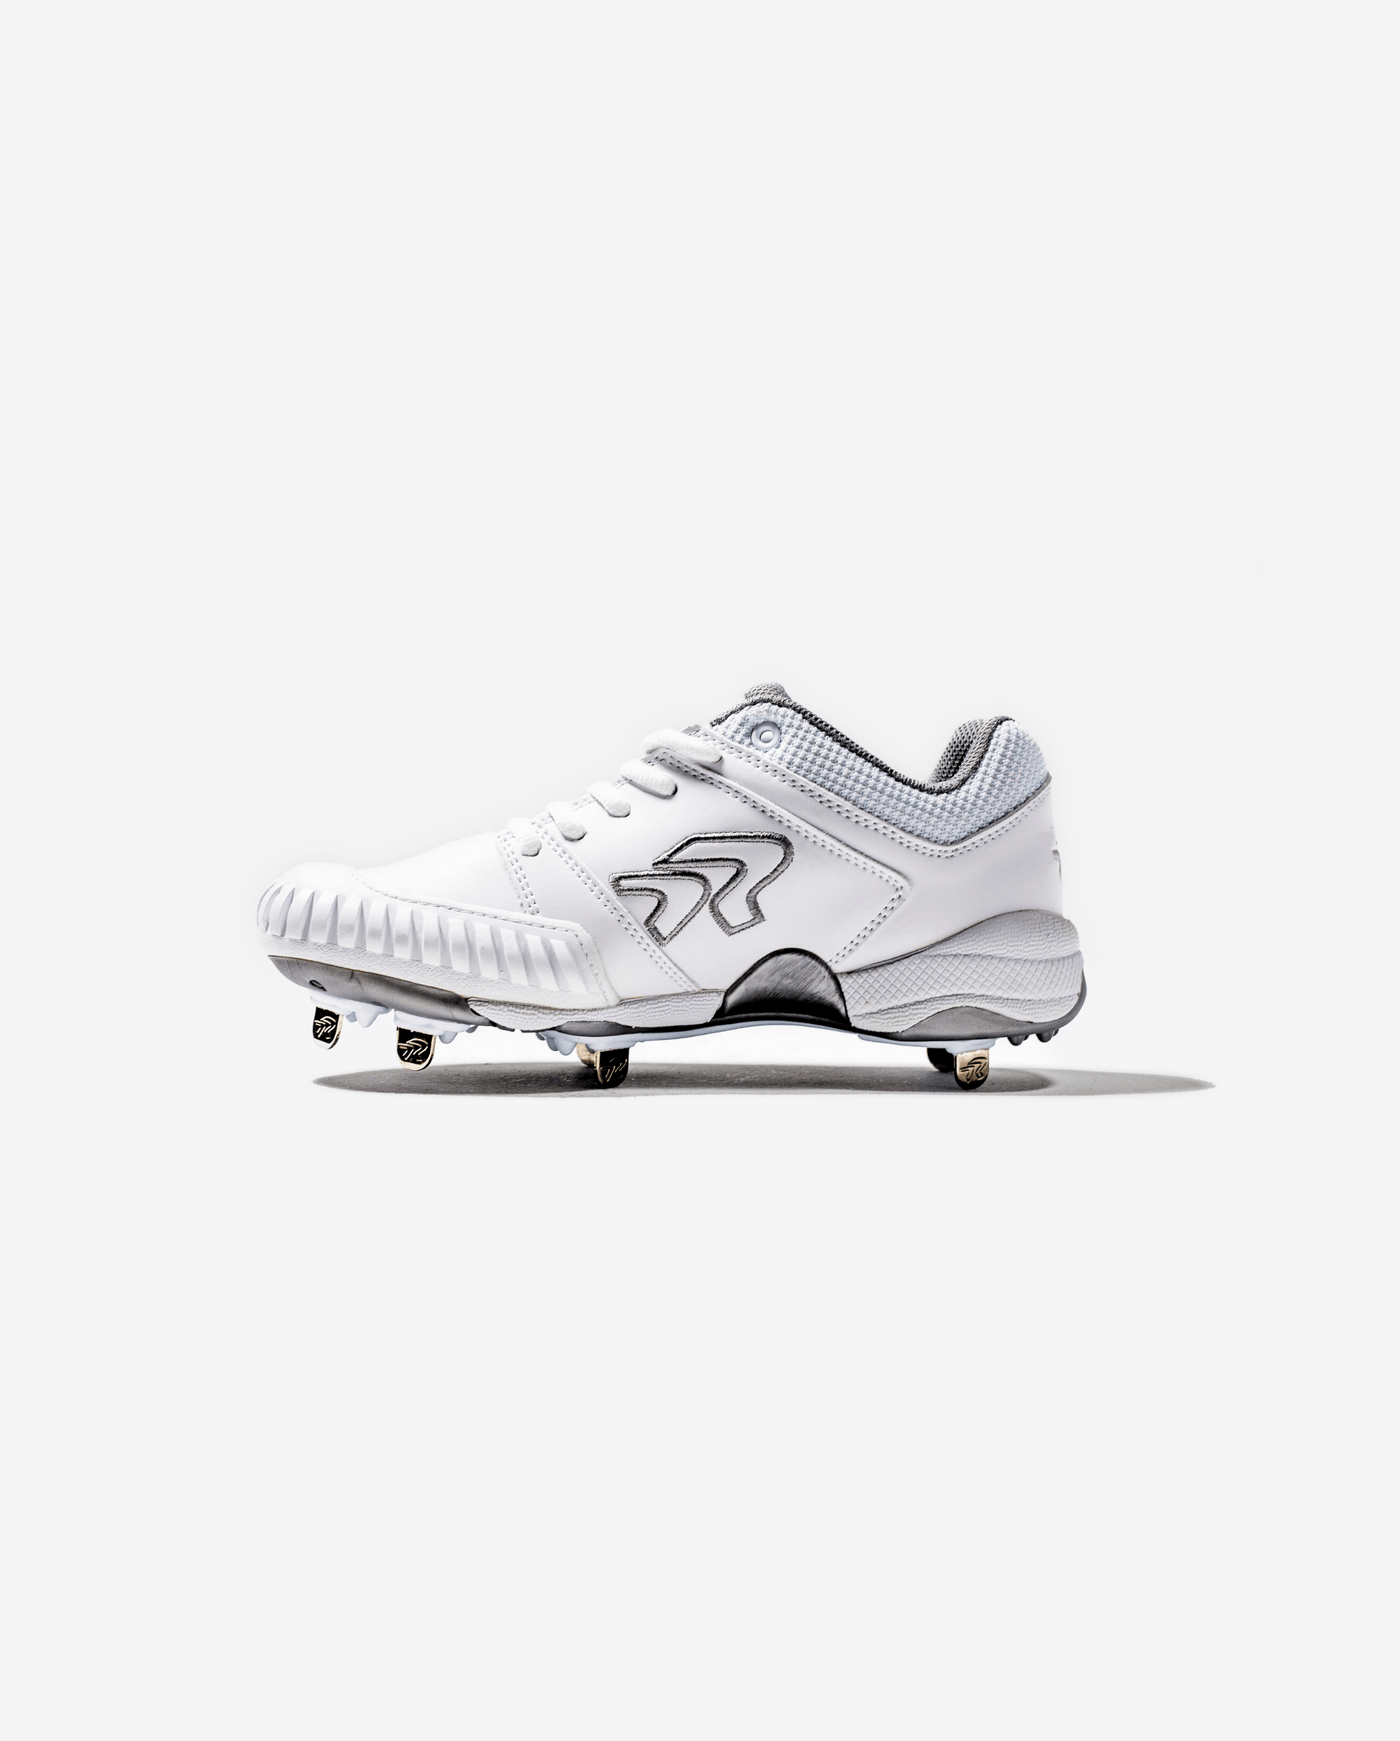 Women's Flite Metal Softball Cleats with Pitching Toe - White (Wide) - RIP-IT Sports